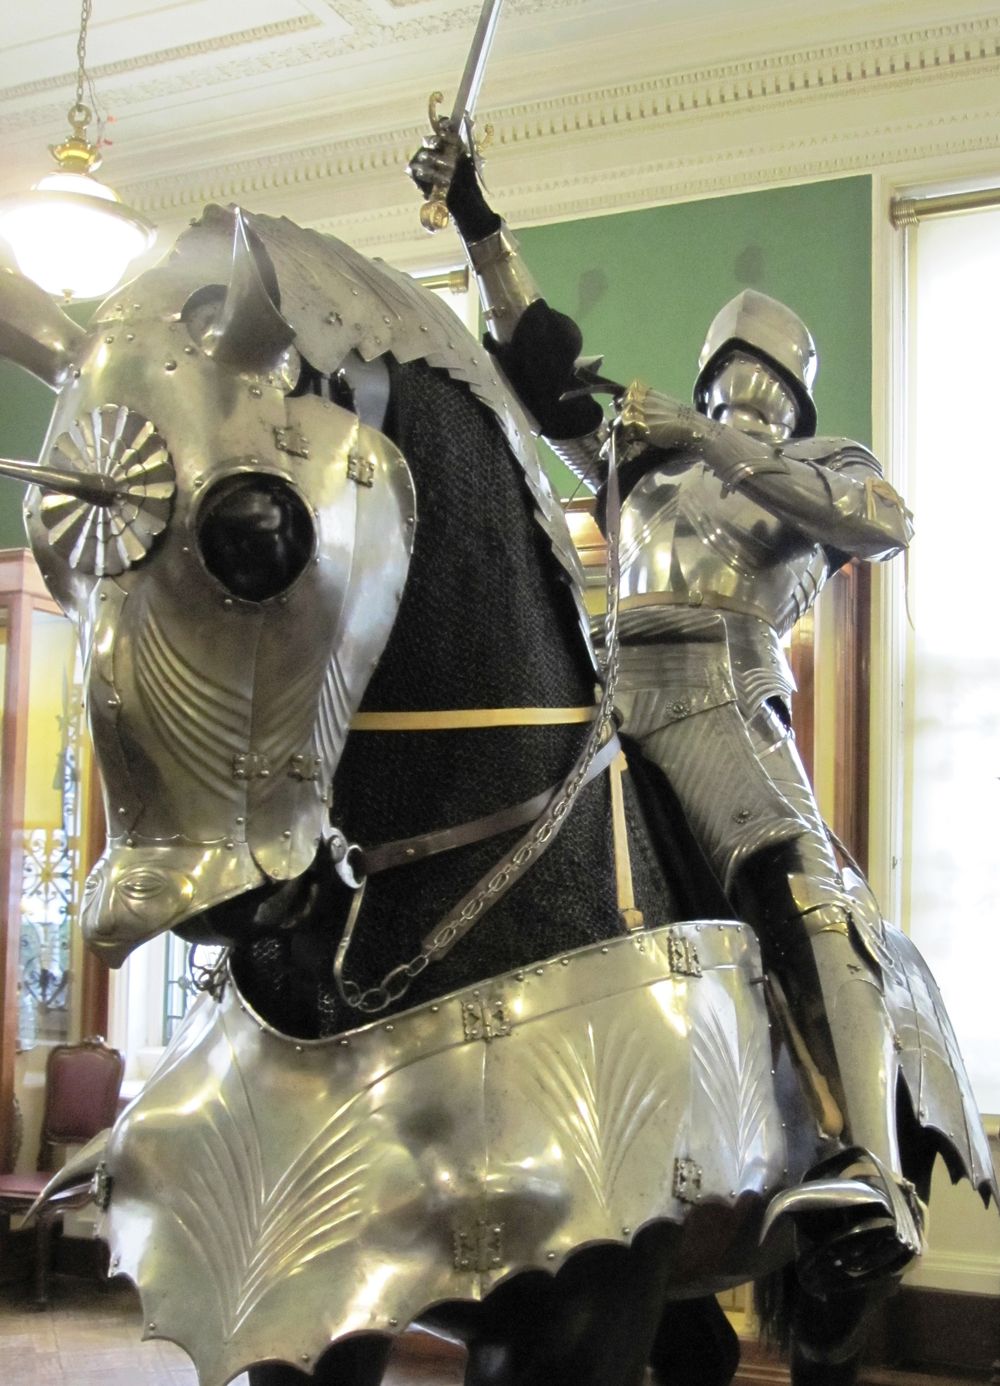 German Gothic armor for horse, XV c., Wallace Collection, London